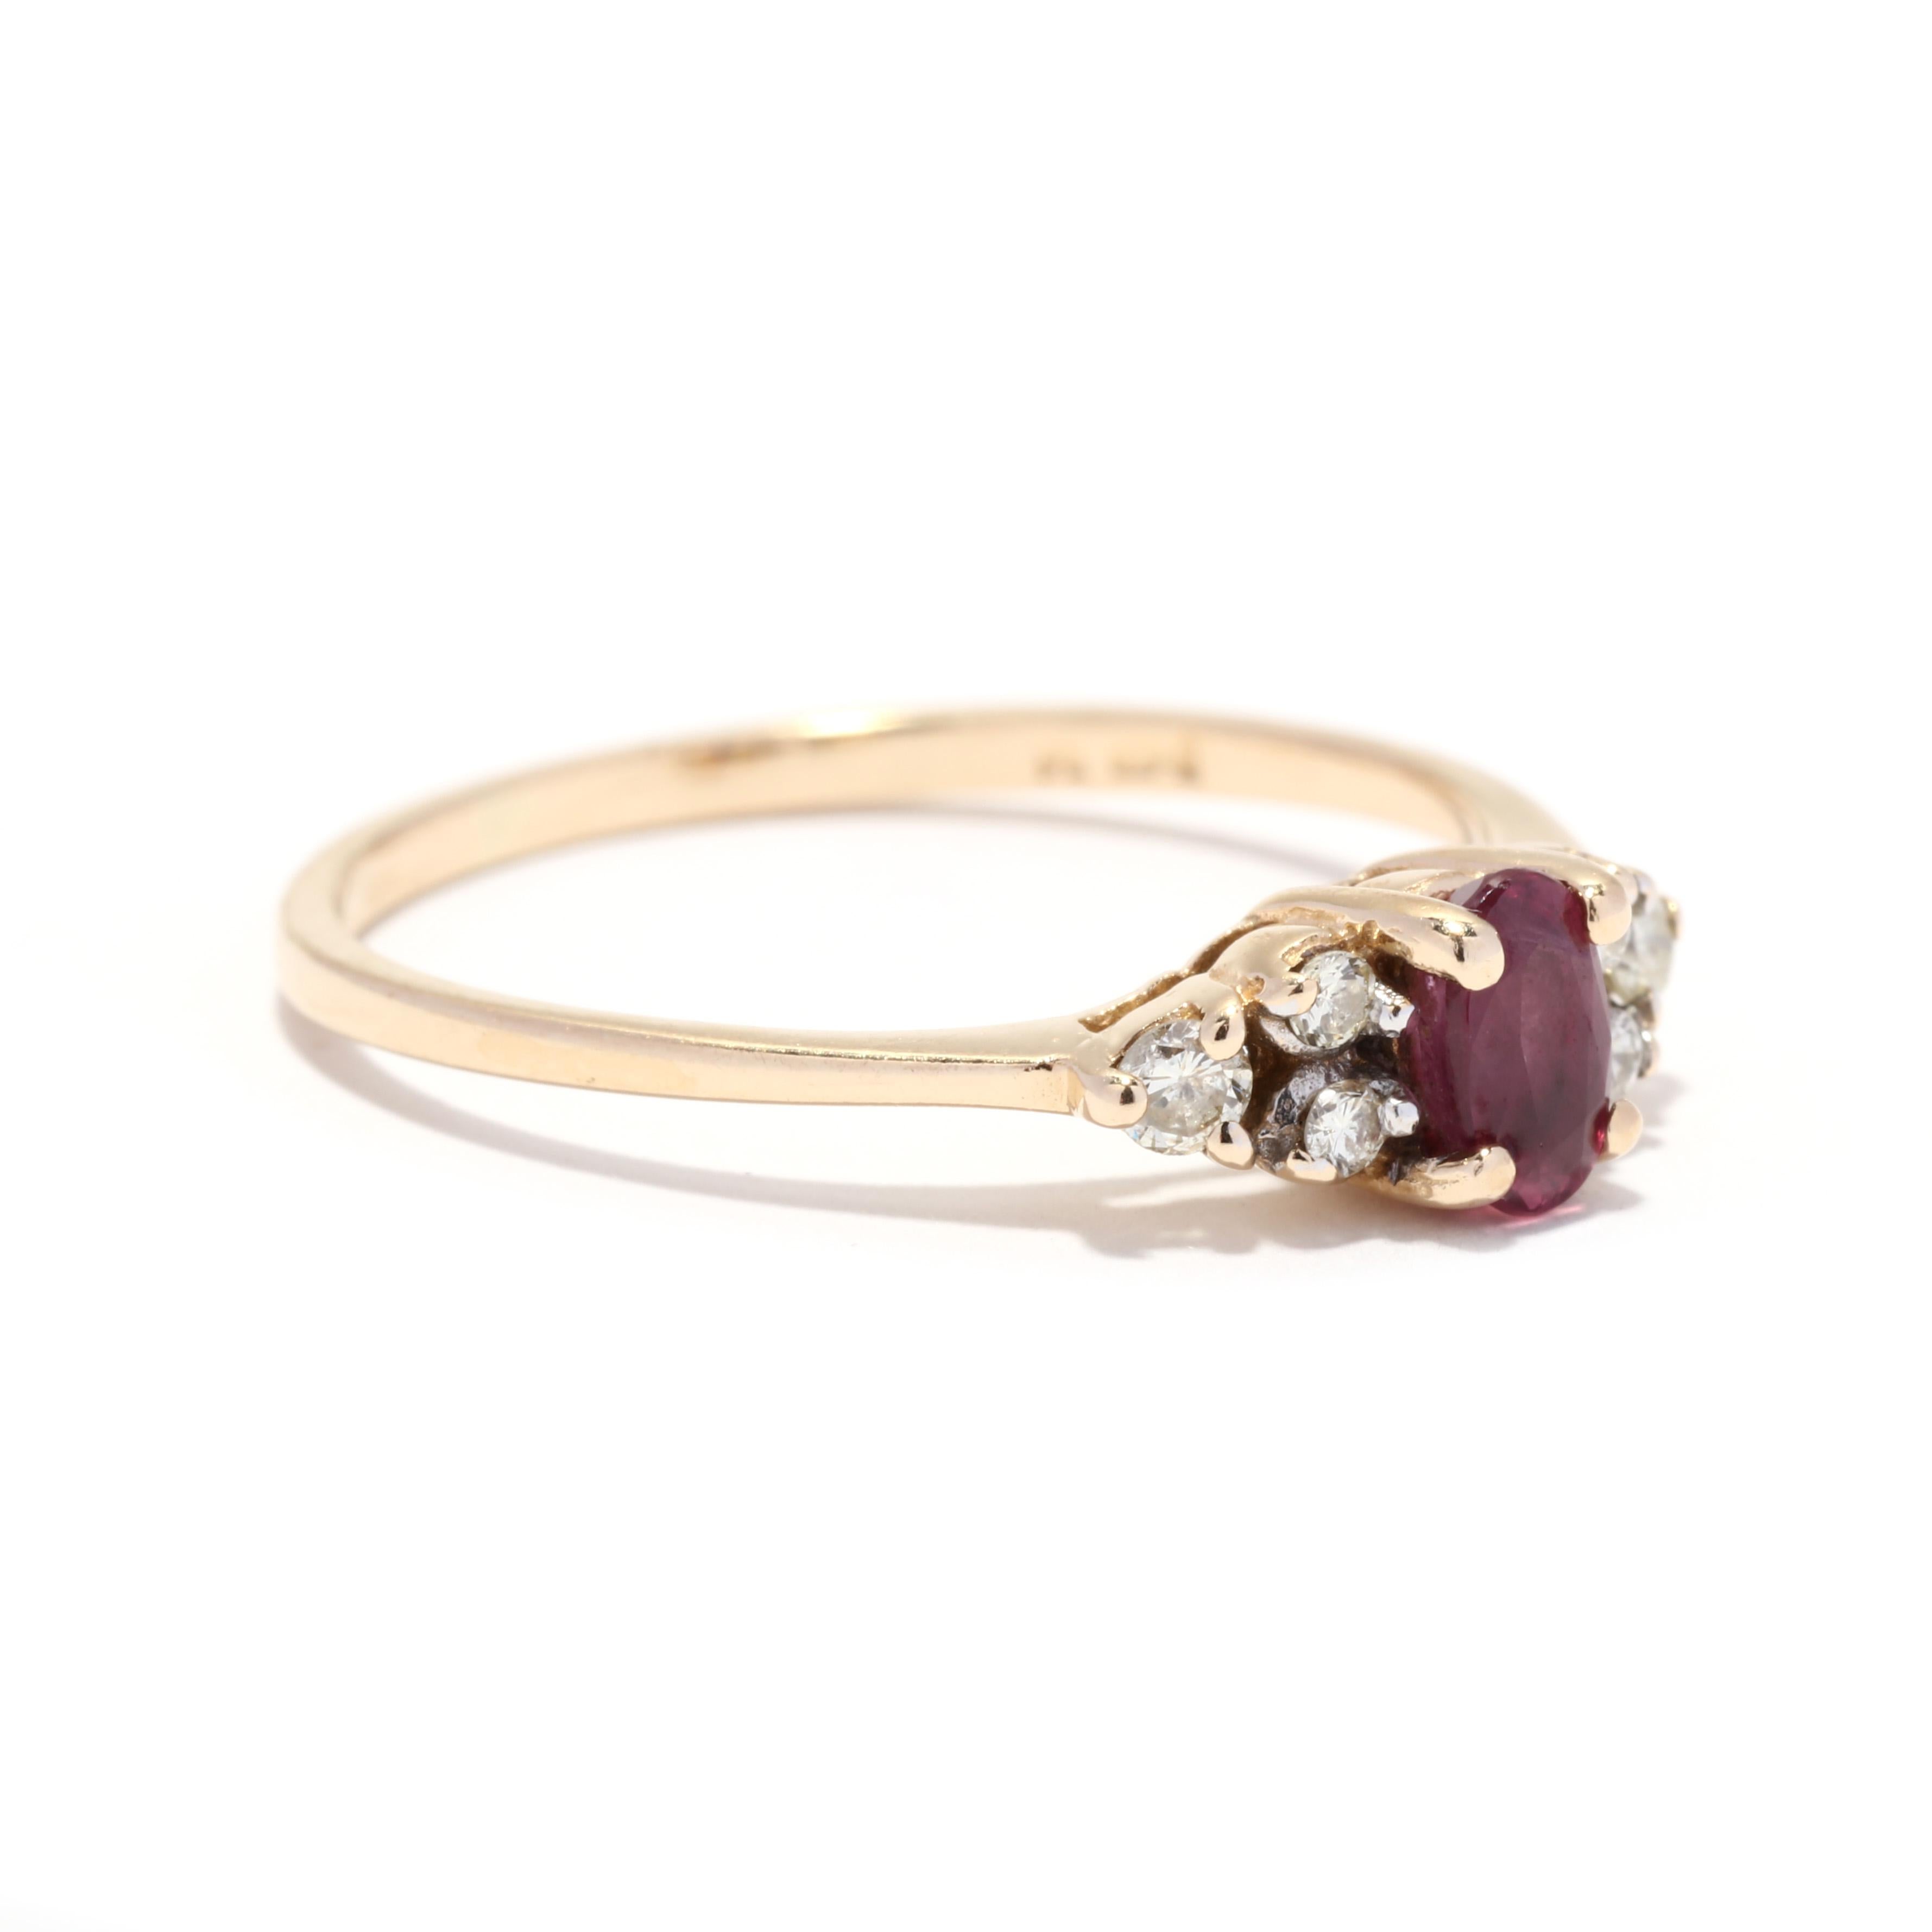 A vintage 14 karat yellow gold ruby and diamond ring. This ring features a prong set, oval cut ruby weighing approximately .32 carat with three round brilliant cut diamonds on either side weighing approximately .10 total carats and with a thin